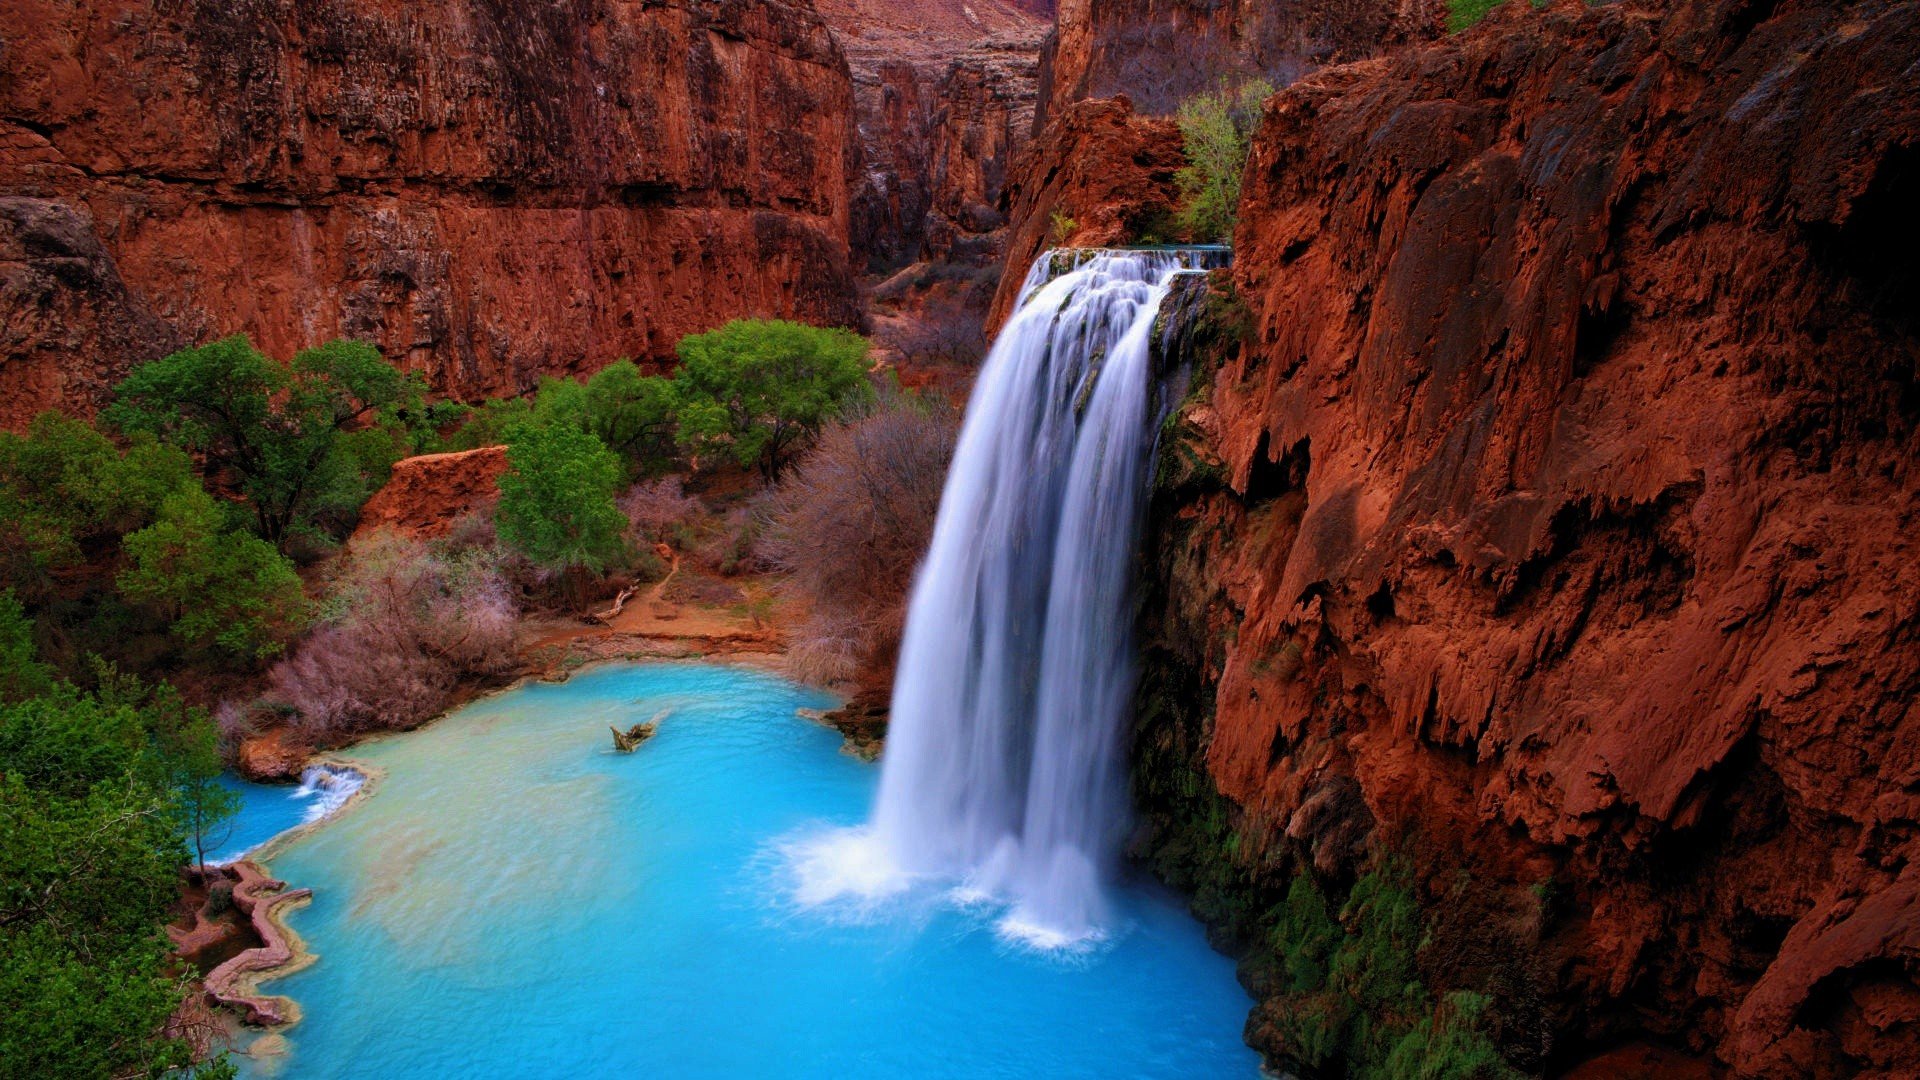 Free photo Picture of a waterfall off a cliff into blue water in a canyon